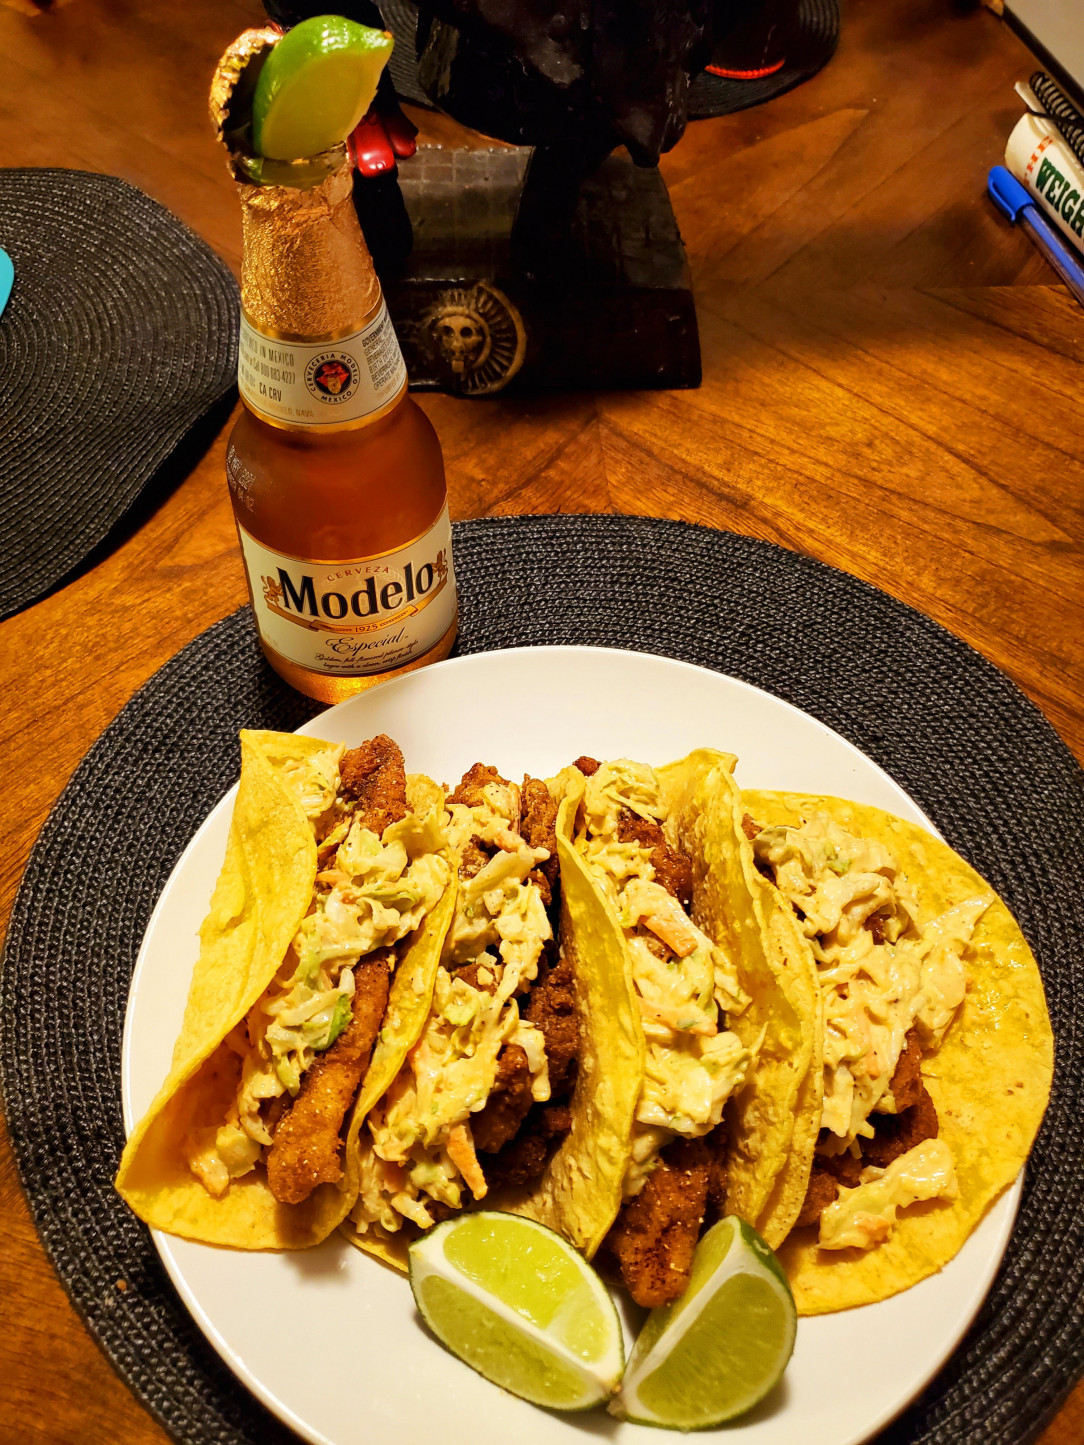 My wife said call me 5 minutes before I get home. Ok? I walk in and and this is prepped on the table waiting for me. Homemade fish and shrimp tacos 🤤